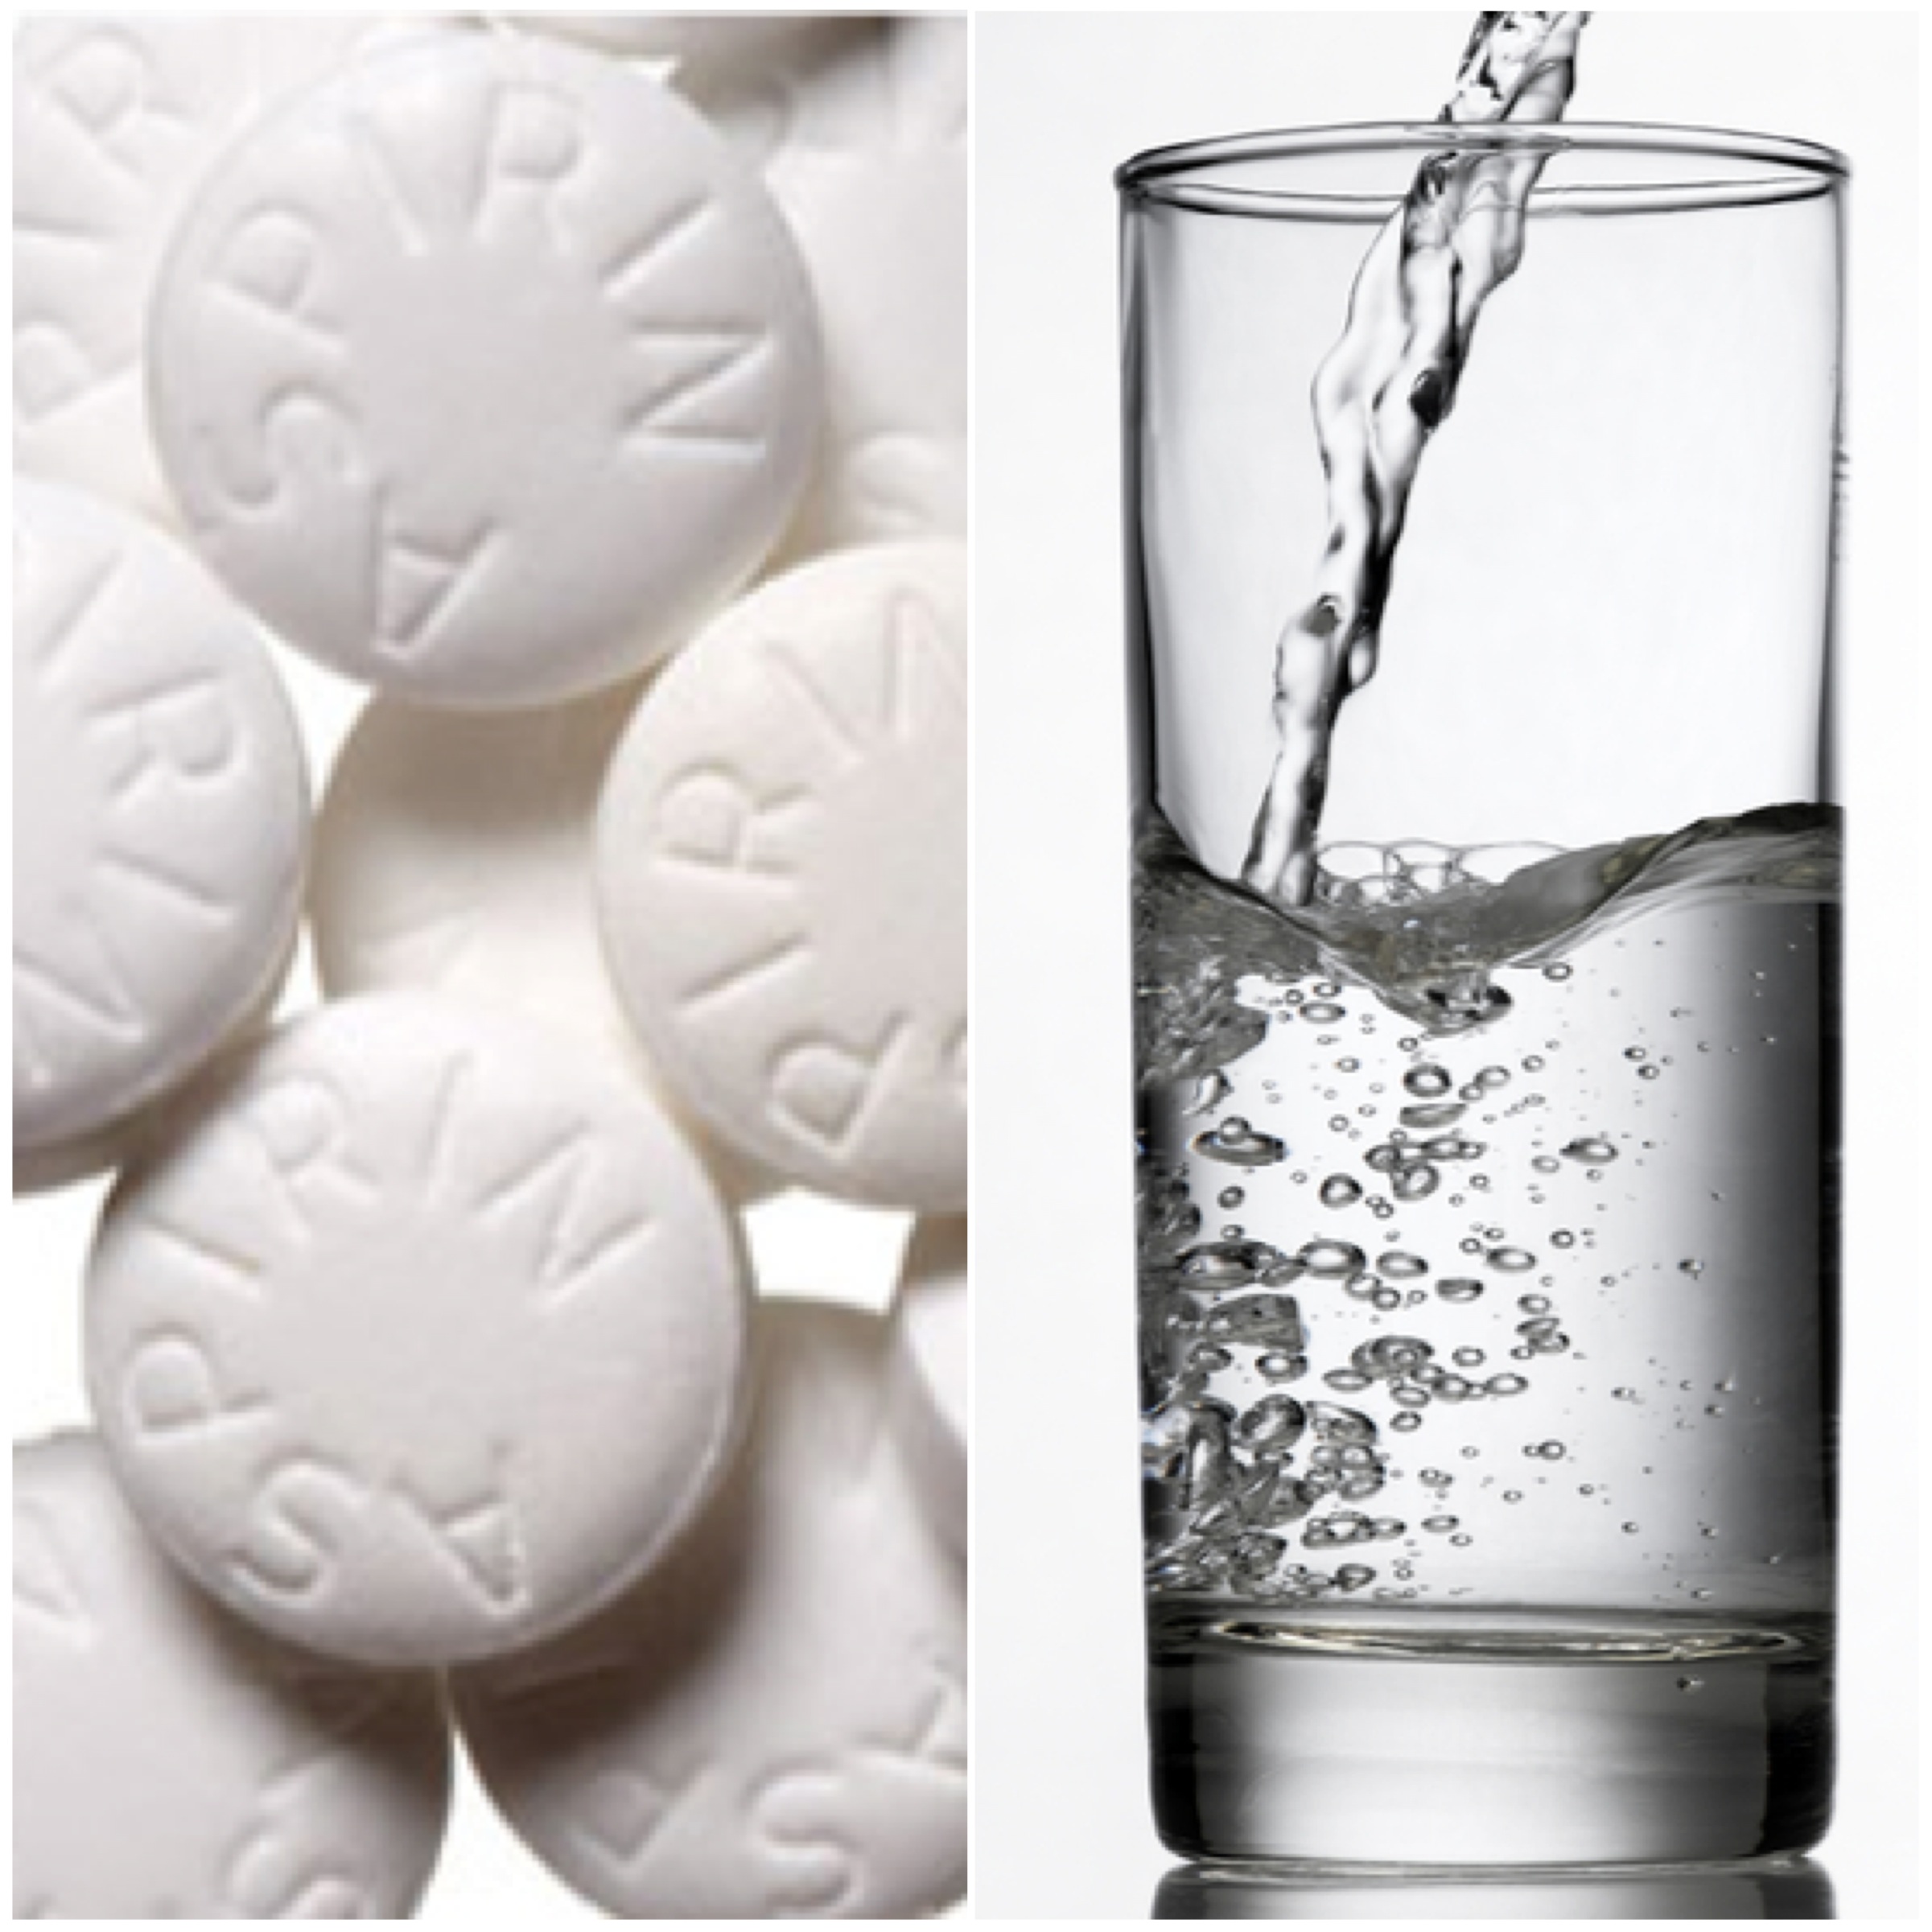 What are the benefits to an aspirin mask?